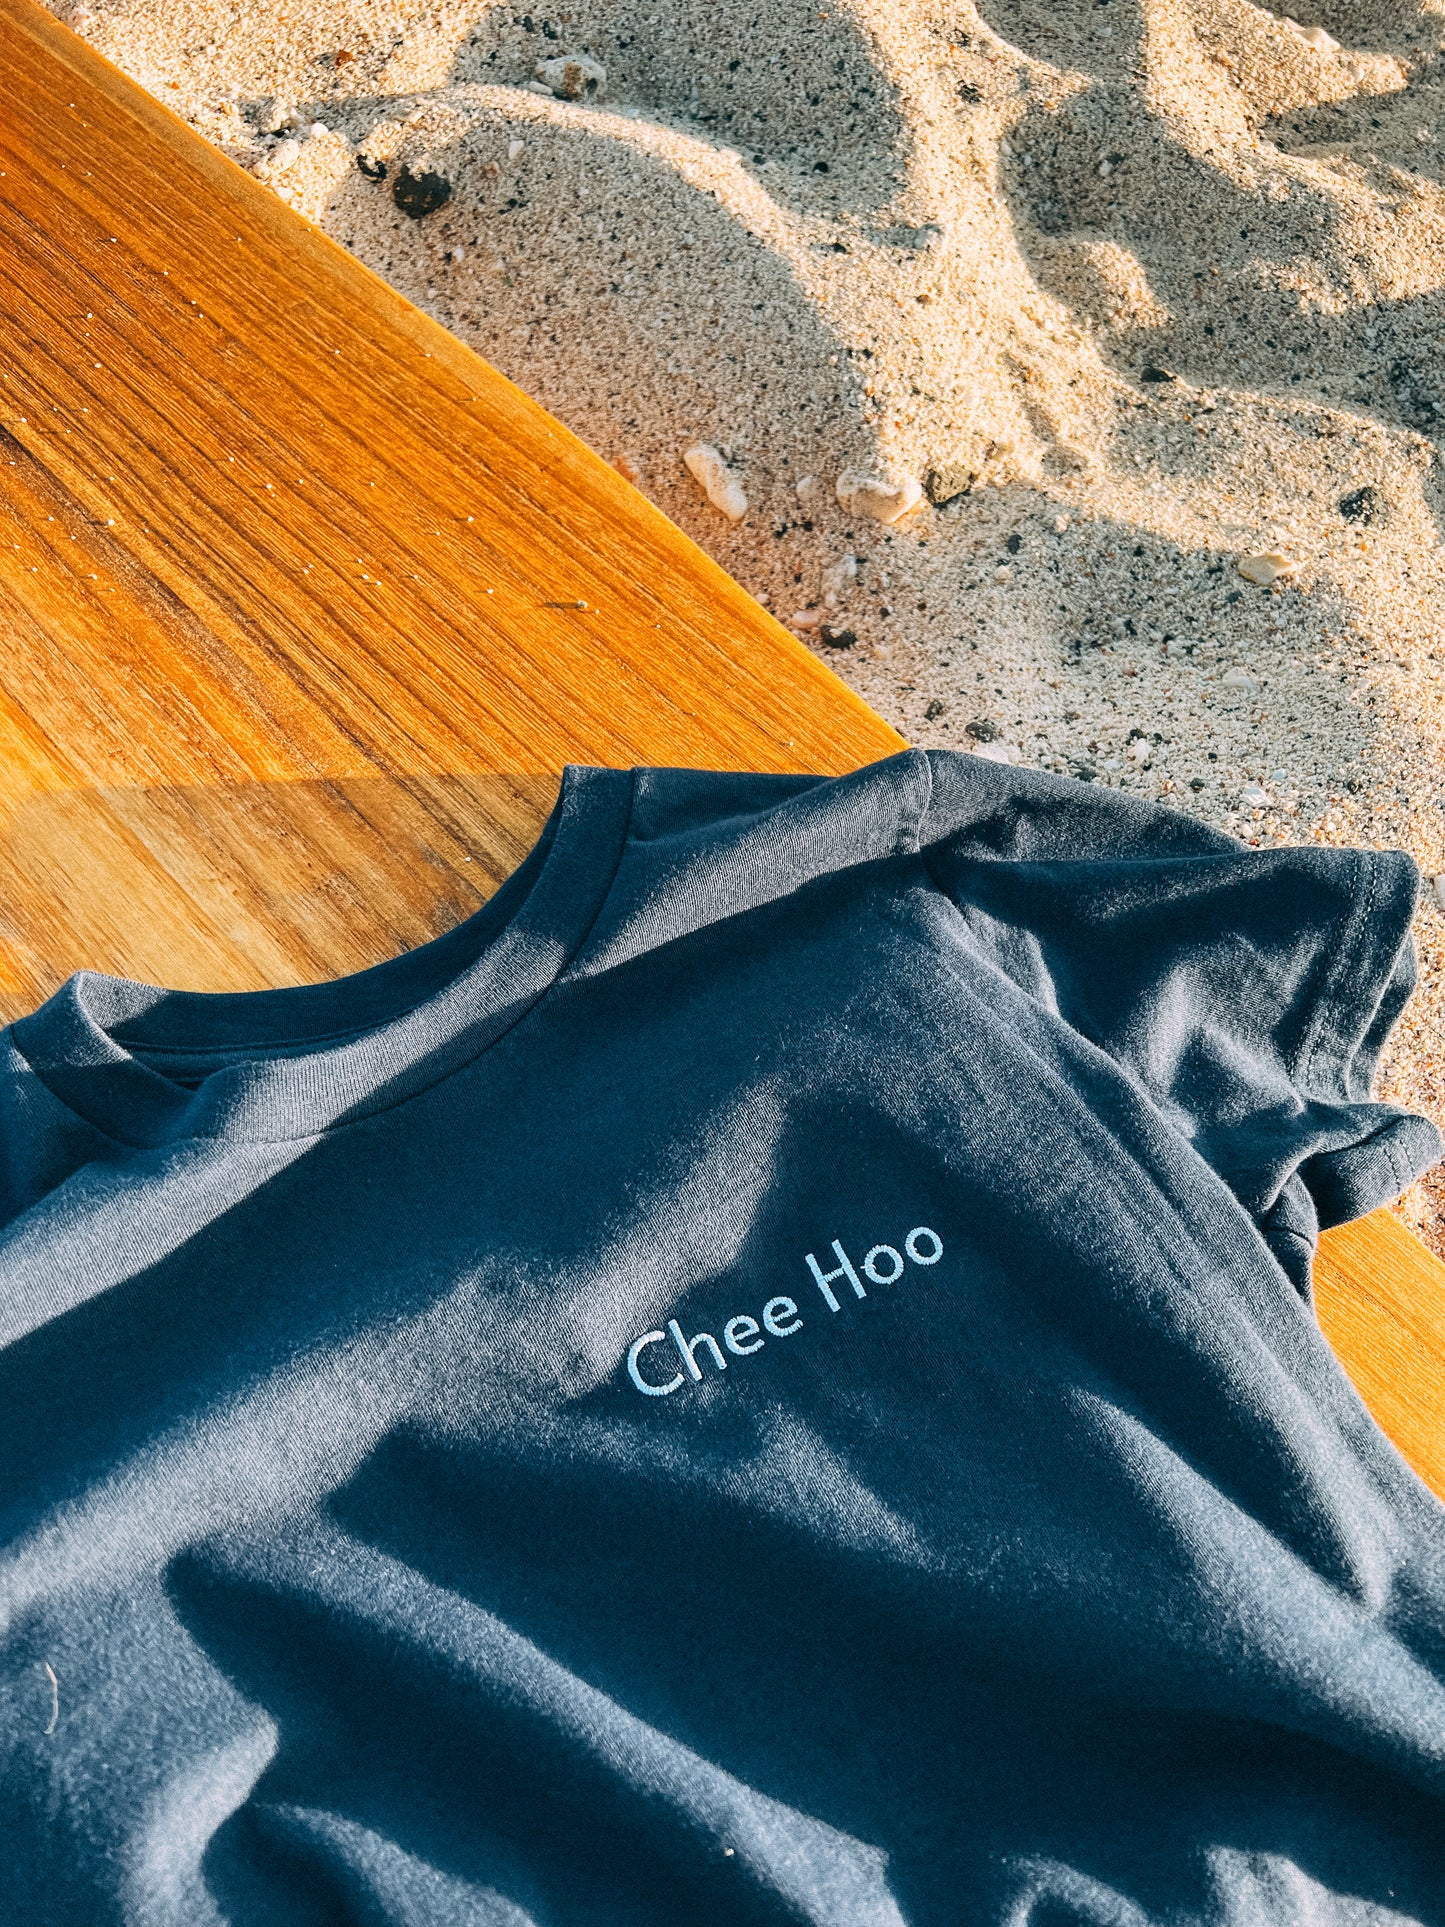 Chee Hoo embroidered Toddler T-shirt